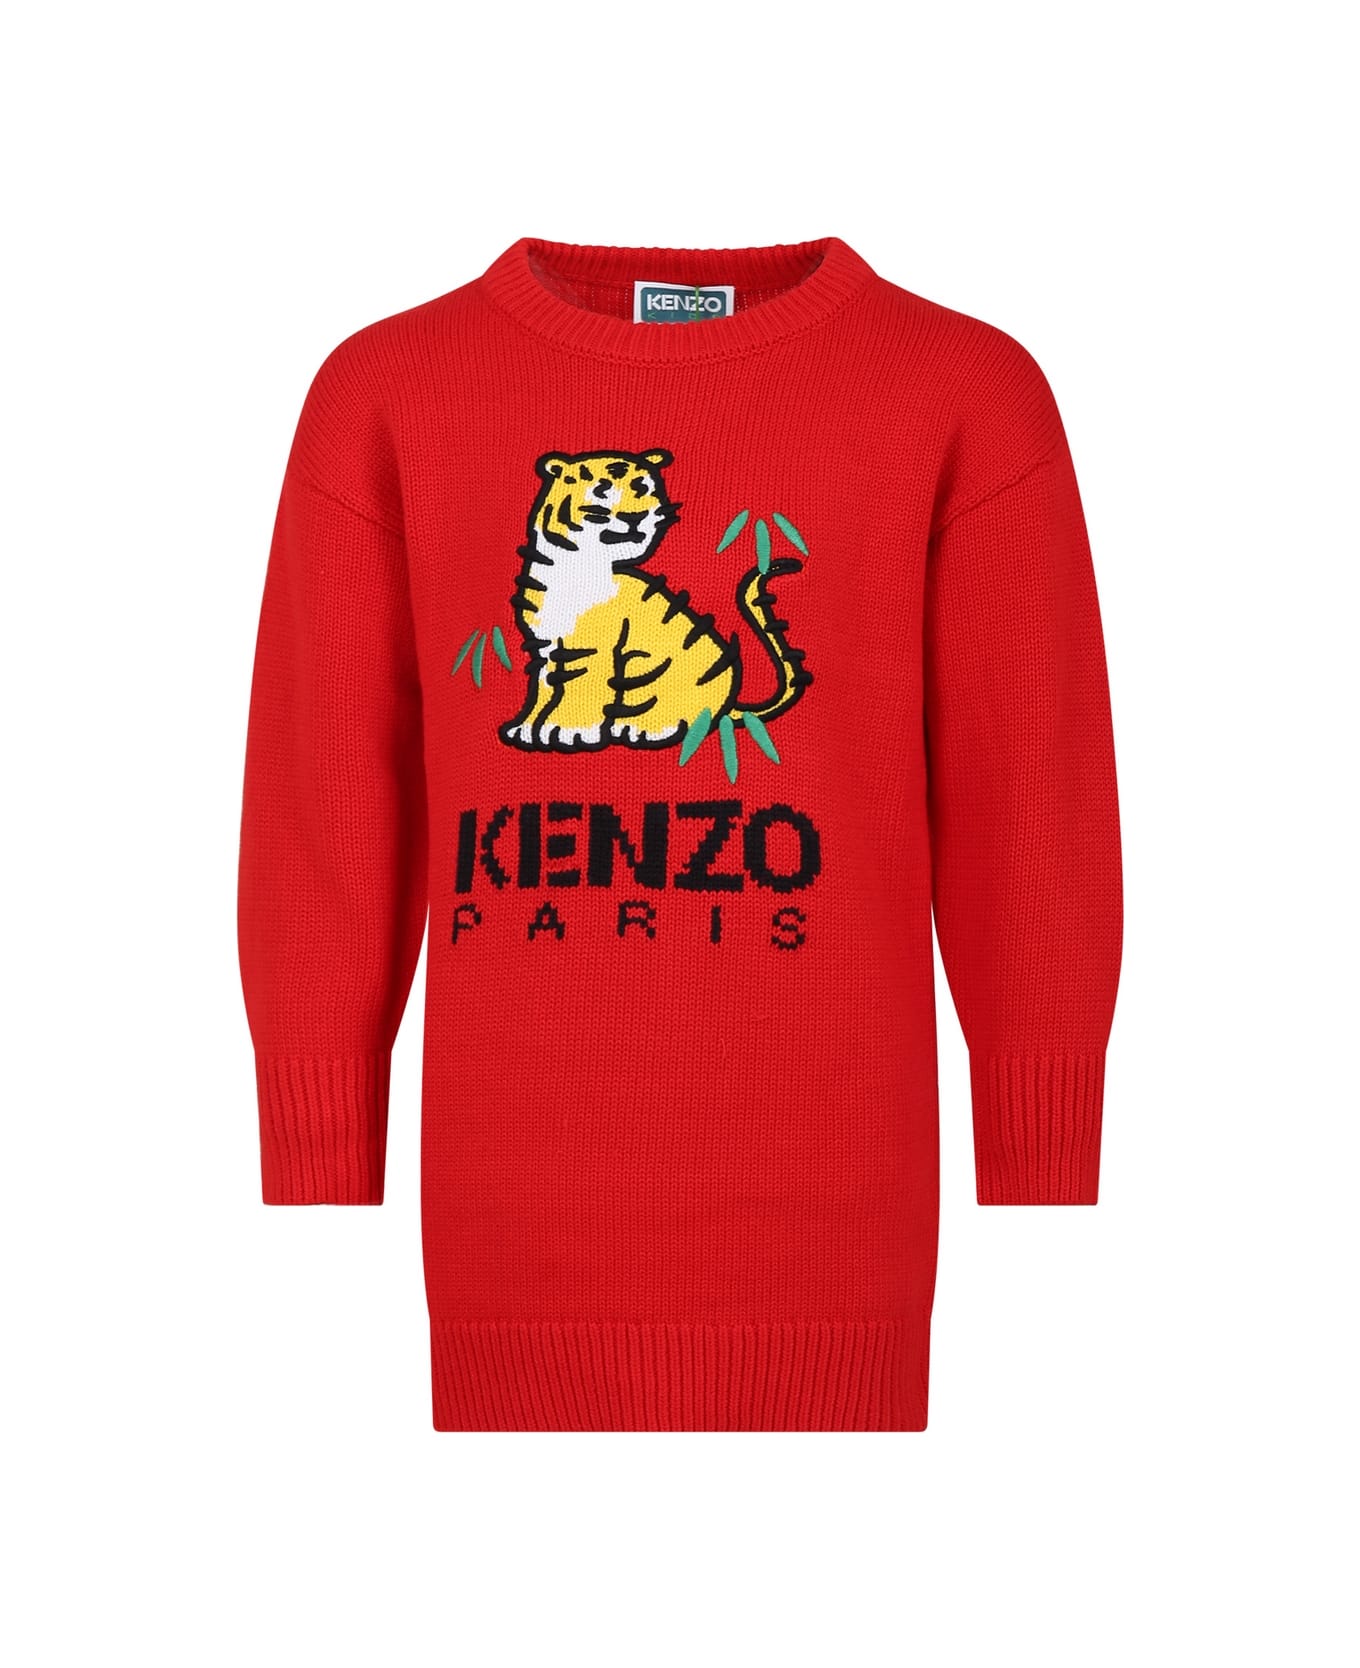 Kenzo Kids Red Dress For Girl With Logo And Tiger - Red